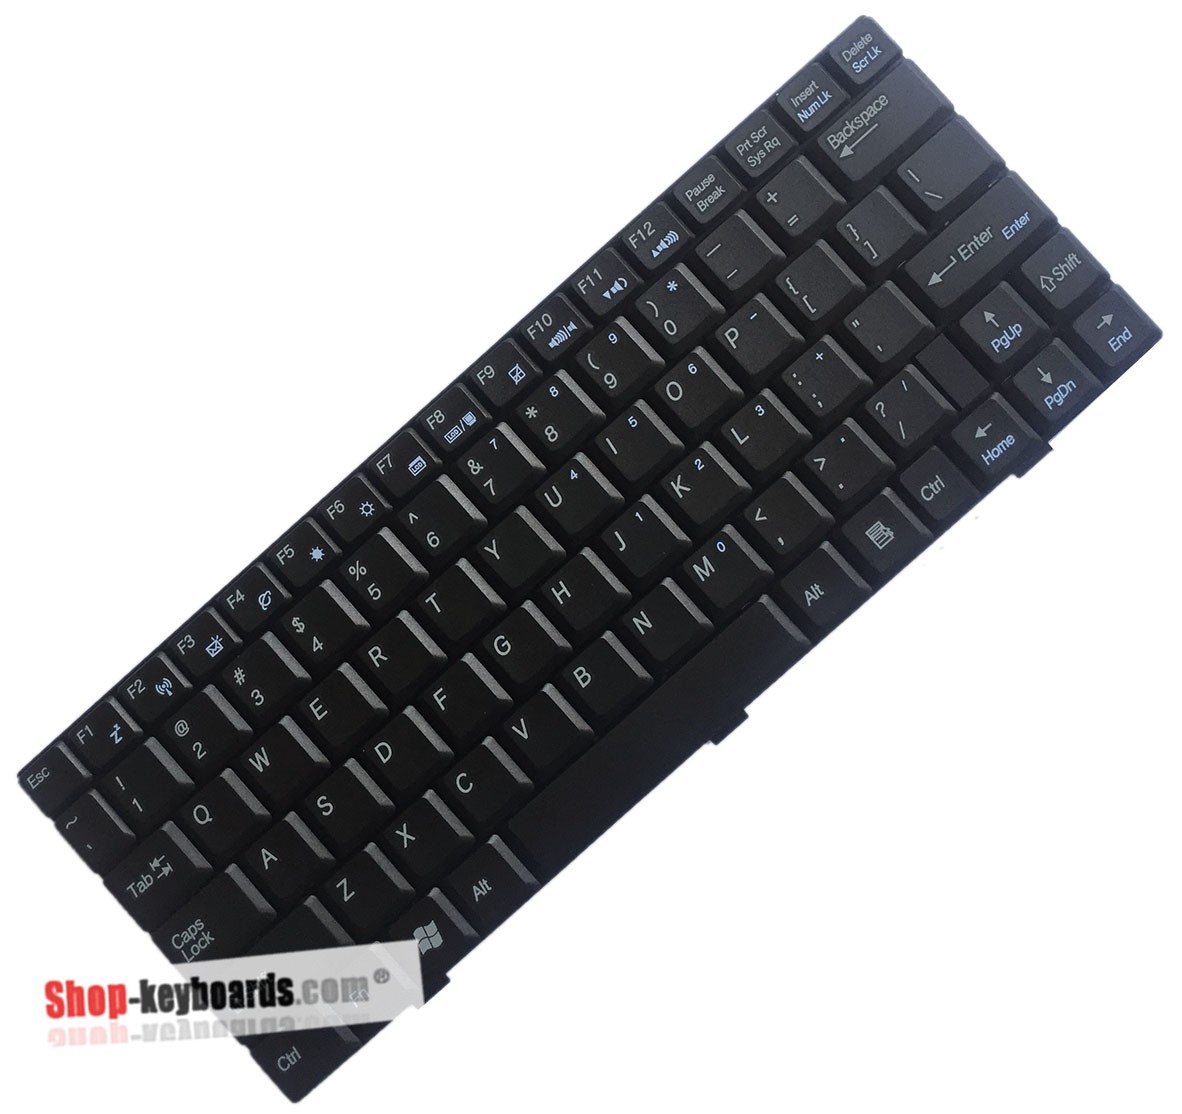 Asus Eee PC 1002H Keyboard replacement